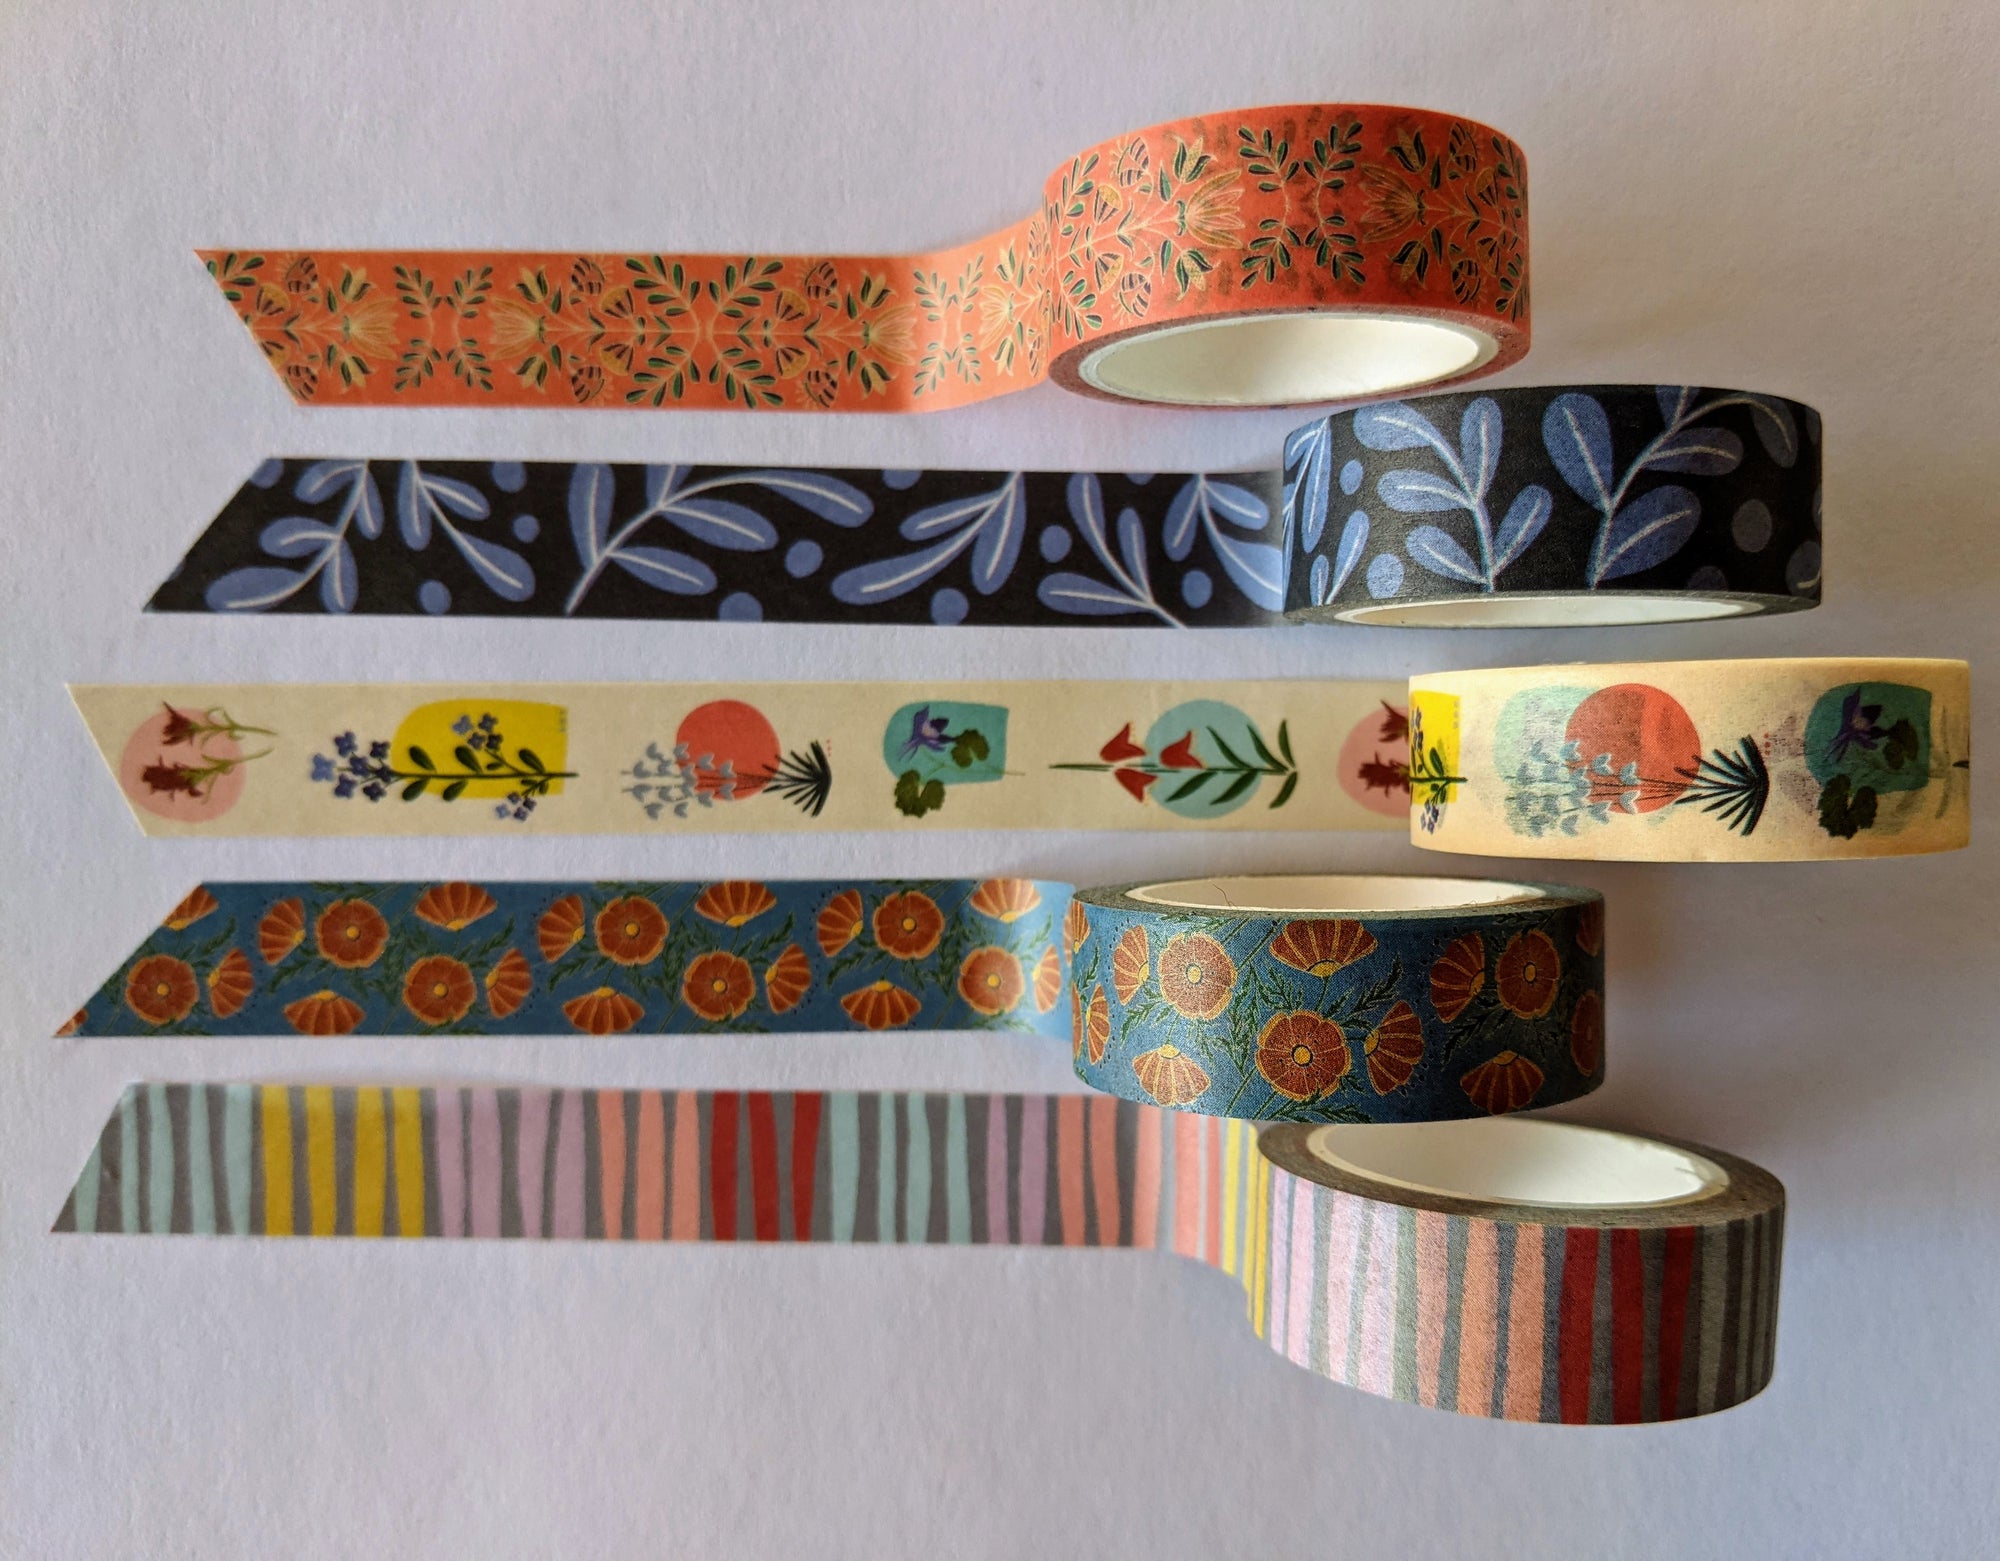 How to Use Washi Tape to Decorate Envelopes